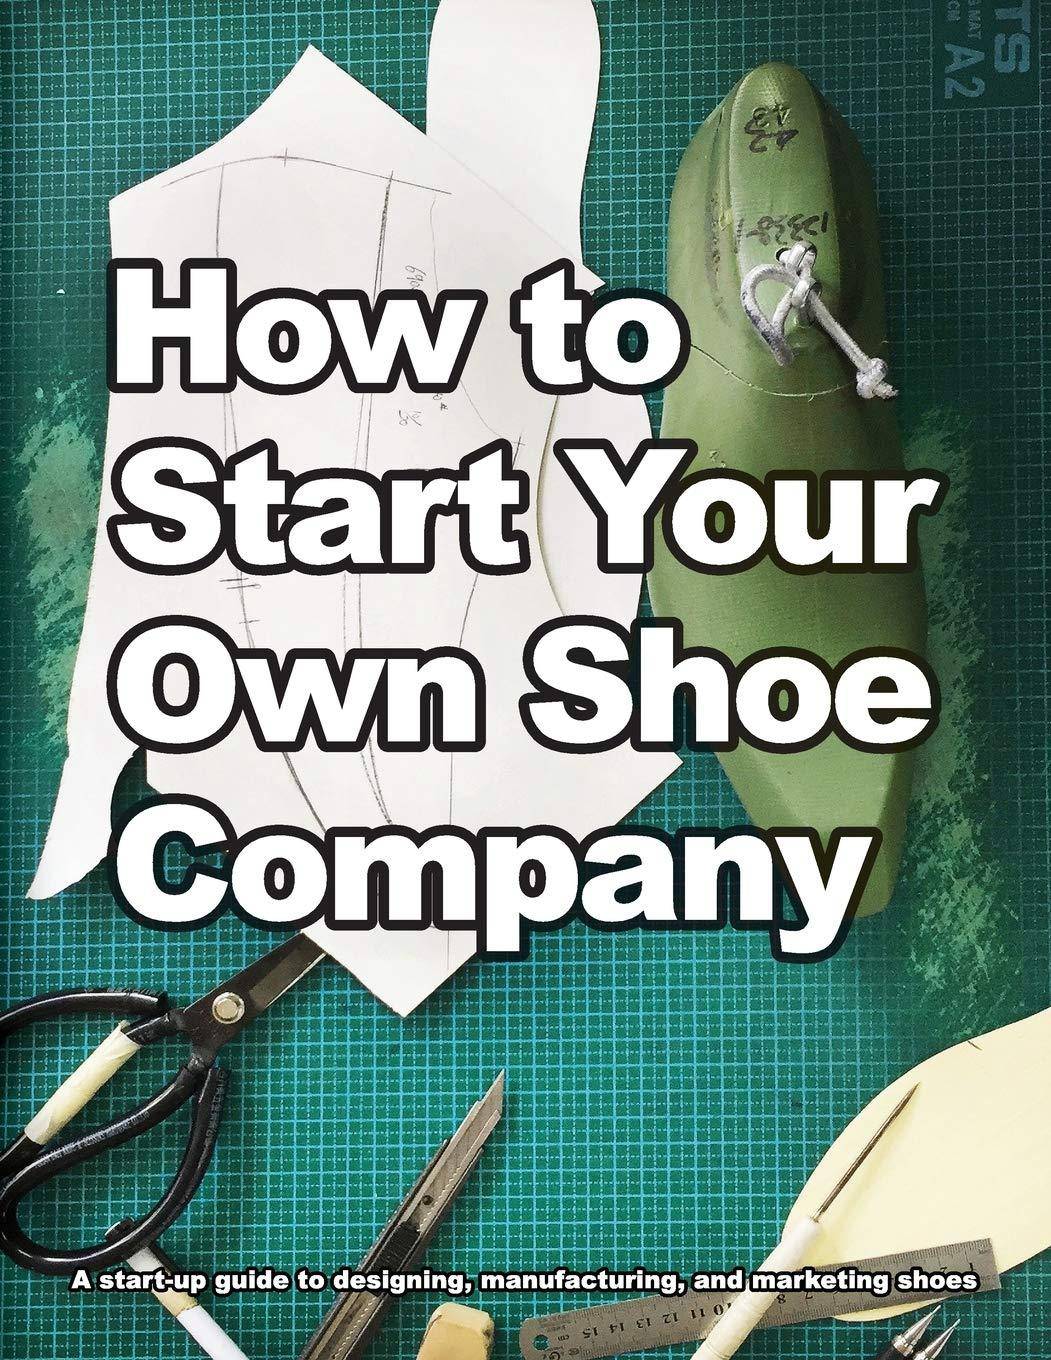 How to Start Your Own Shoe Company - SureShot Books Publishing LLC